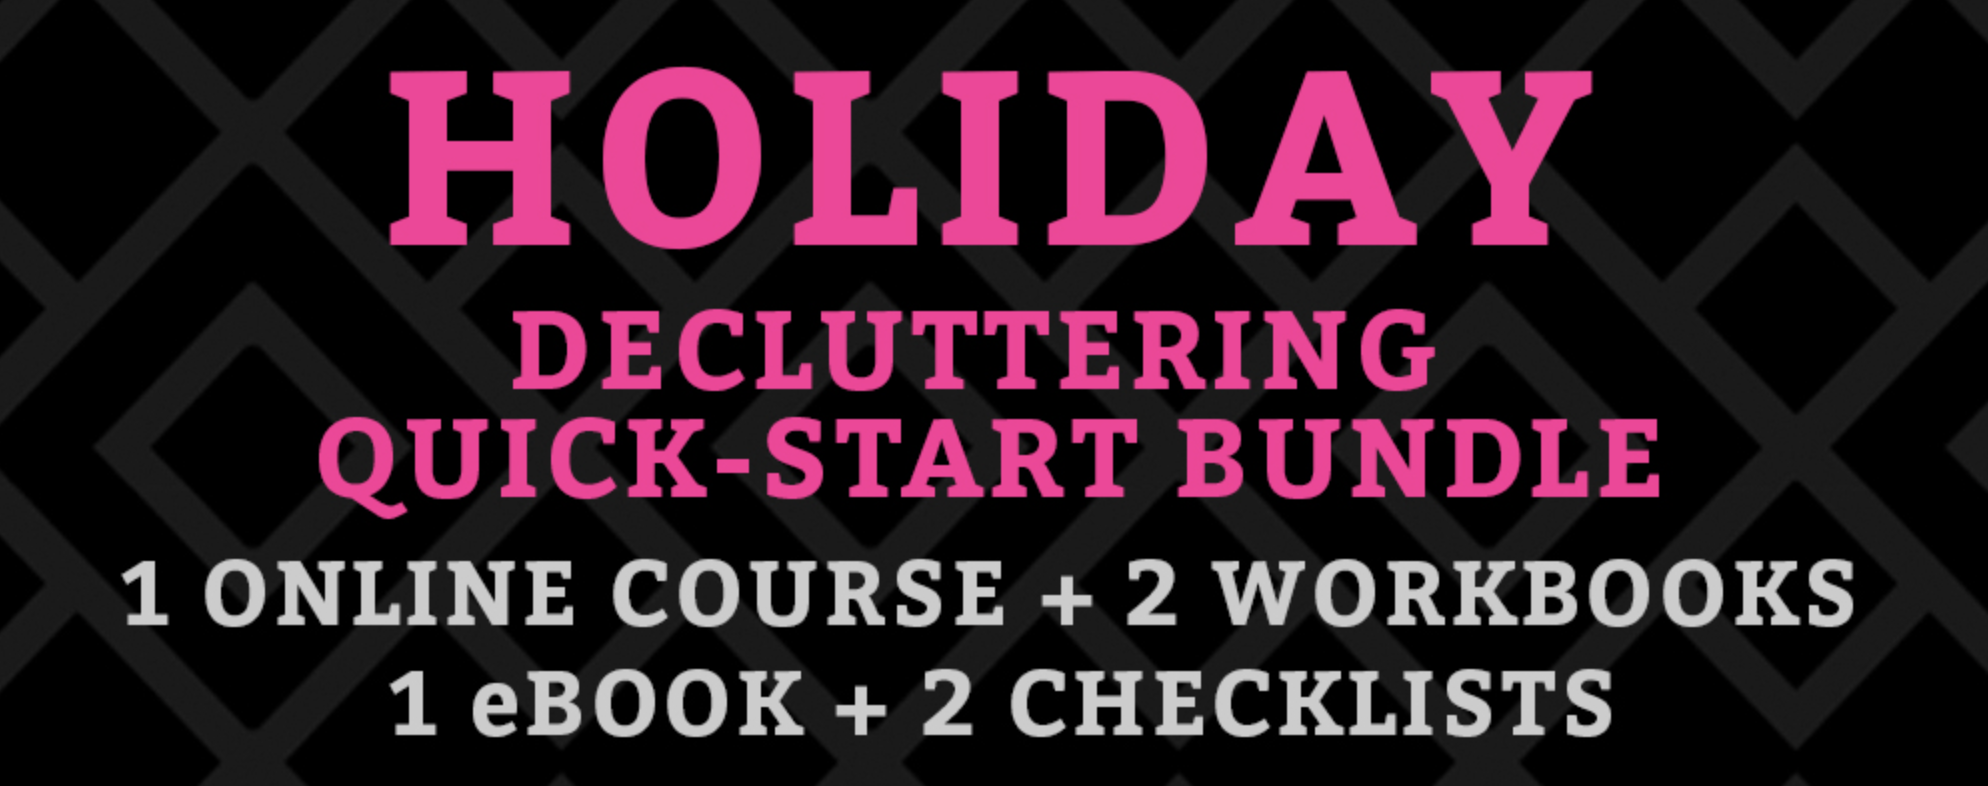 My Holiday Decluttering Bundle can teach you all you need to know about decluttering.